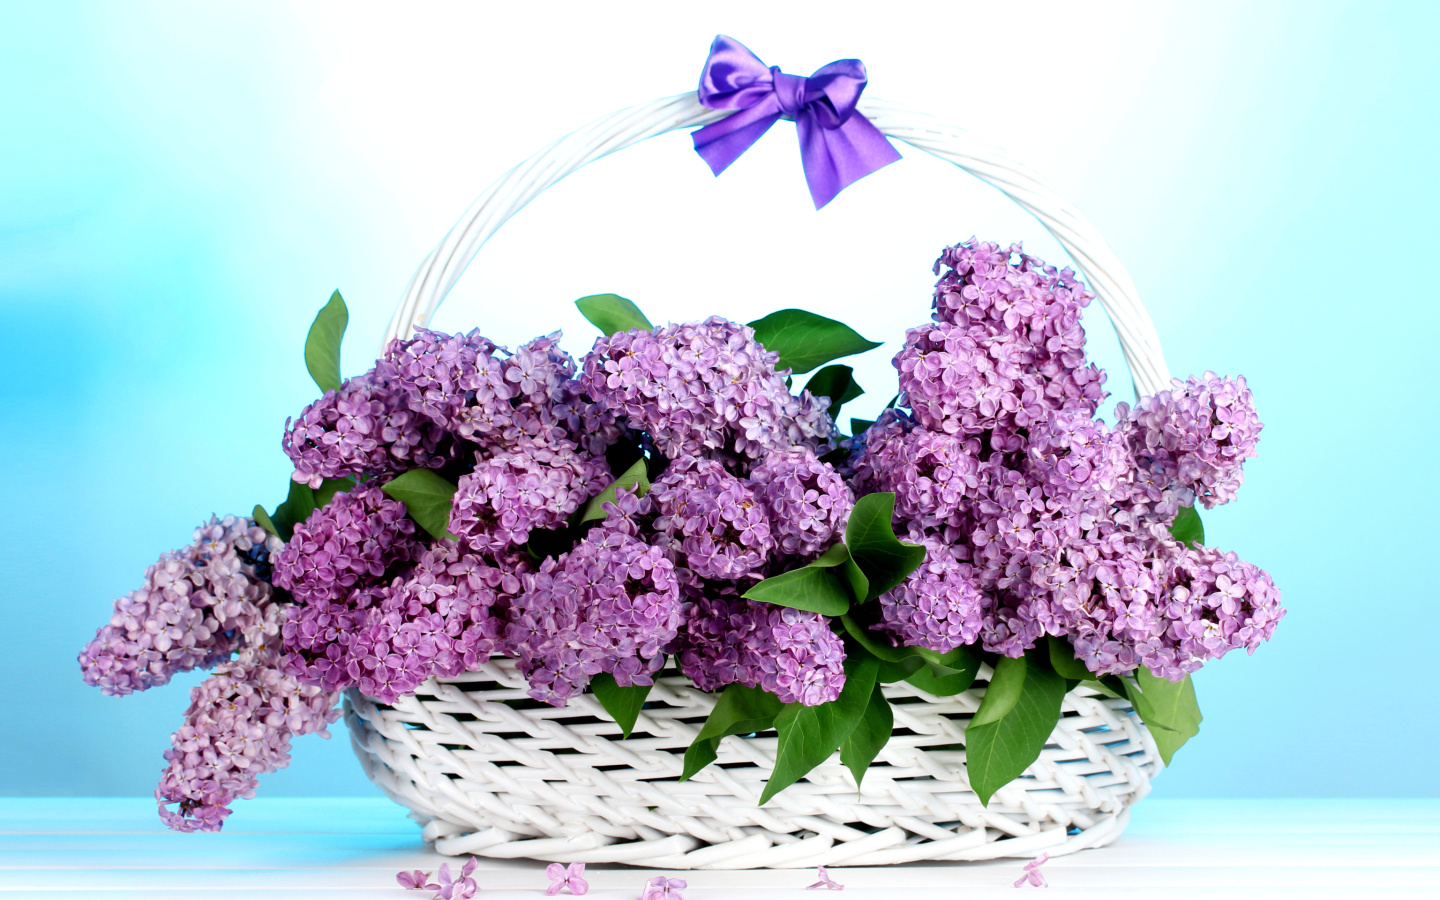 Baskets with lilac flowers wallpaper 1440x900